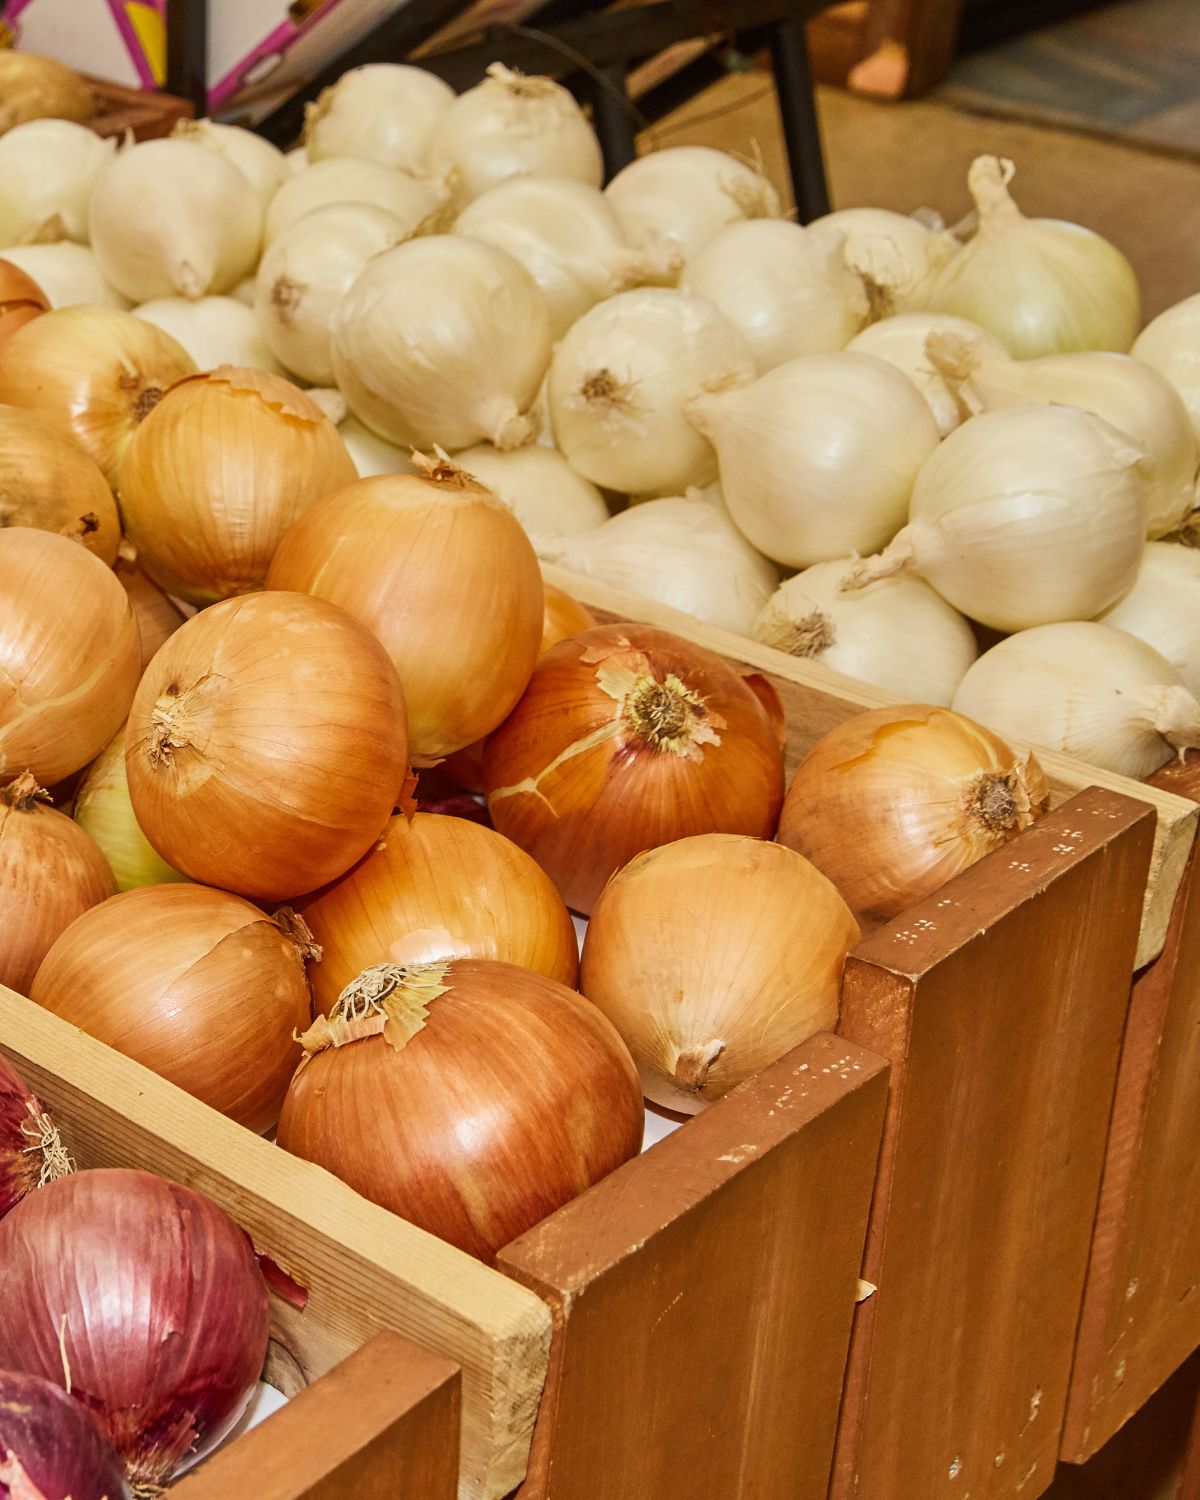 Yellow and white onions in a wooden crate.